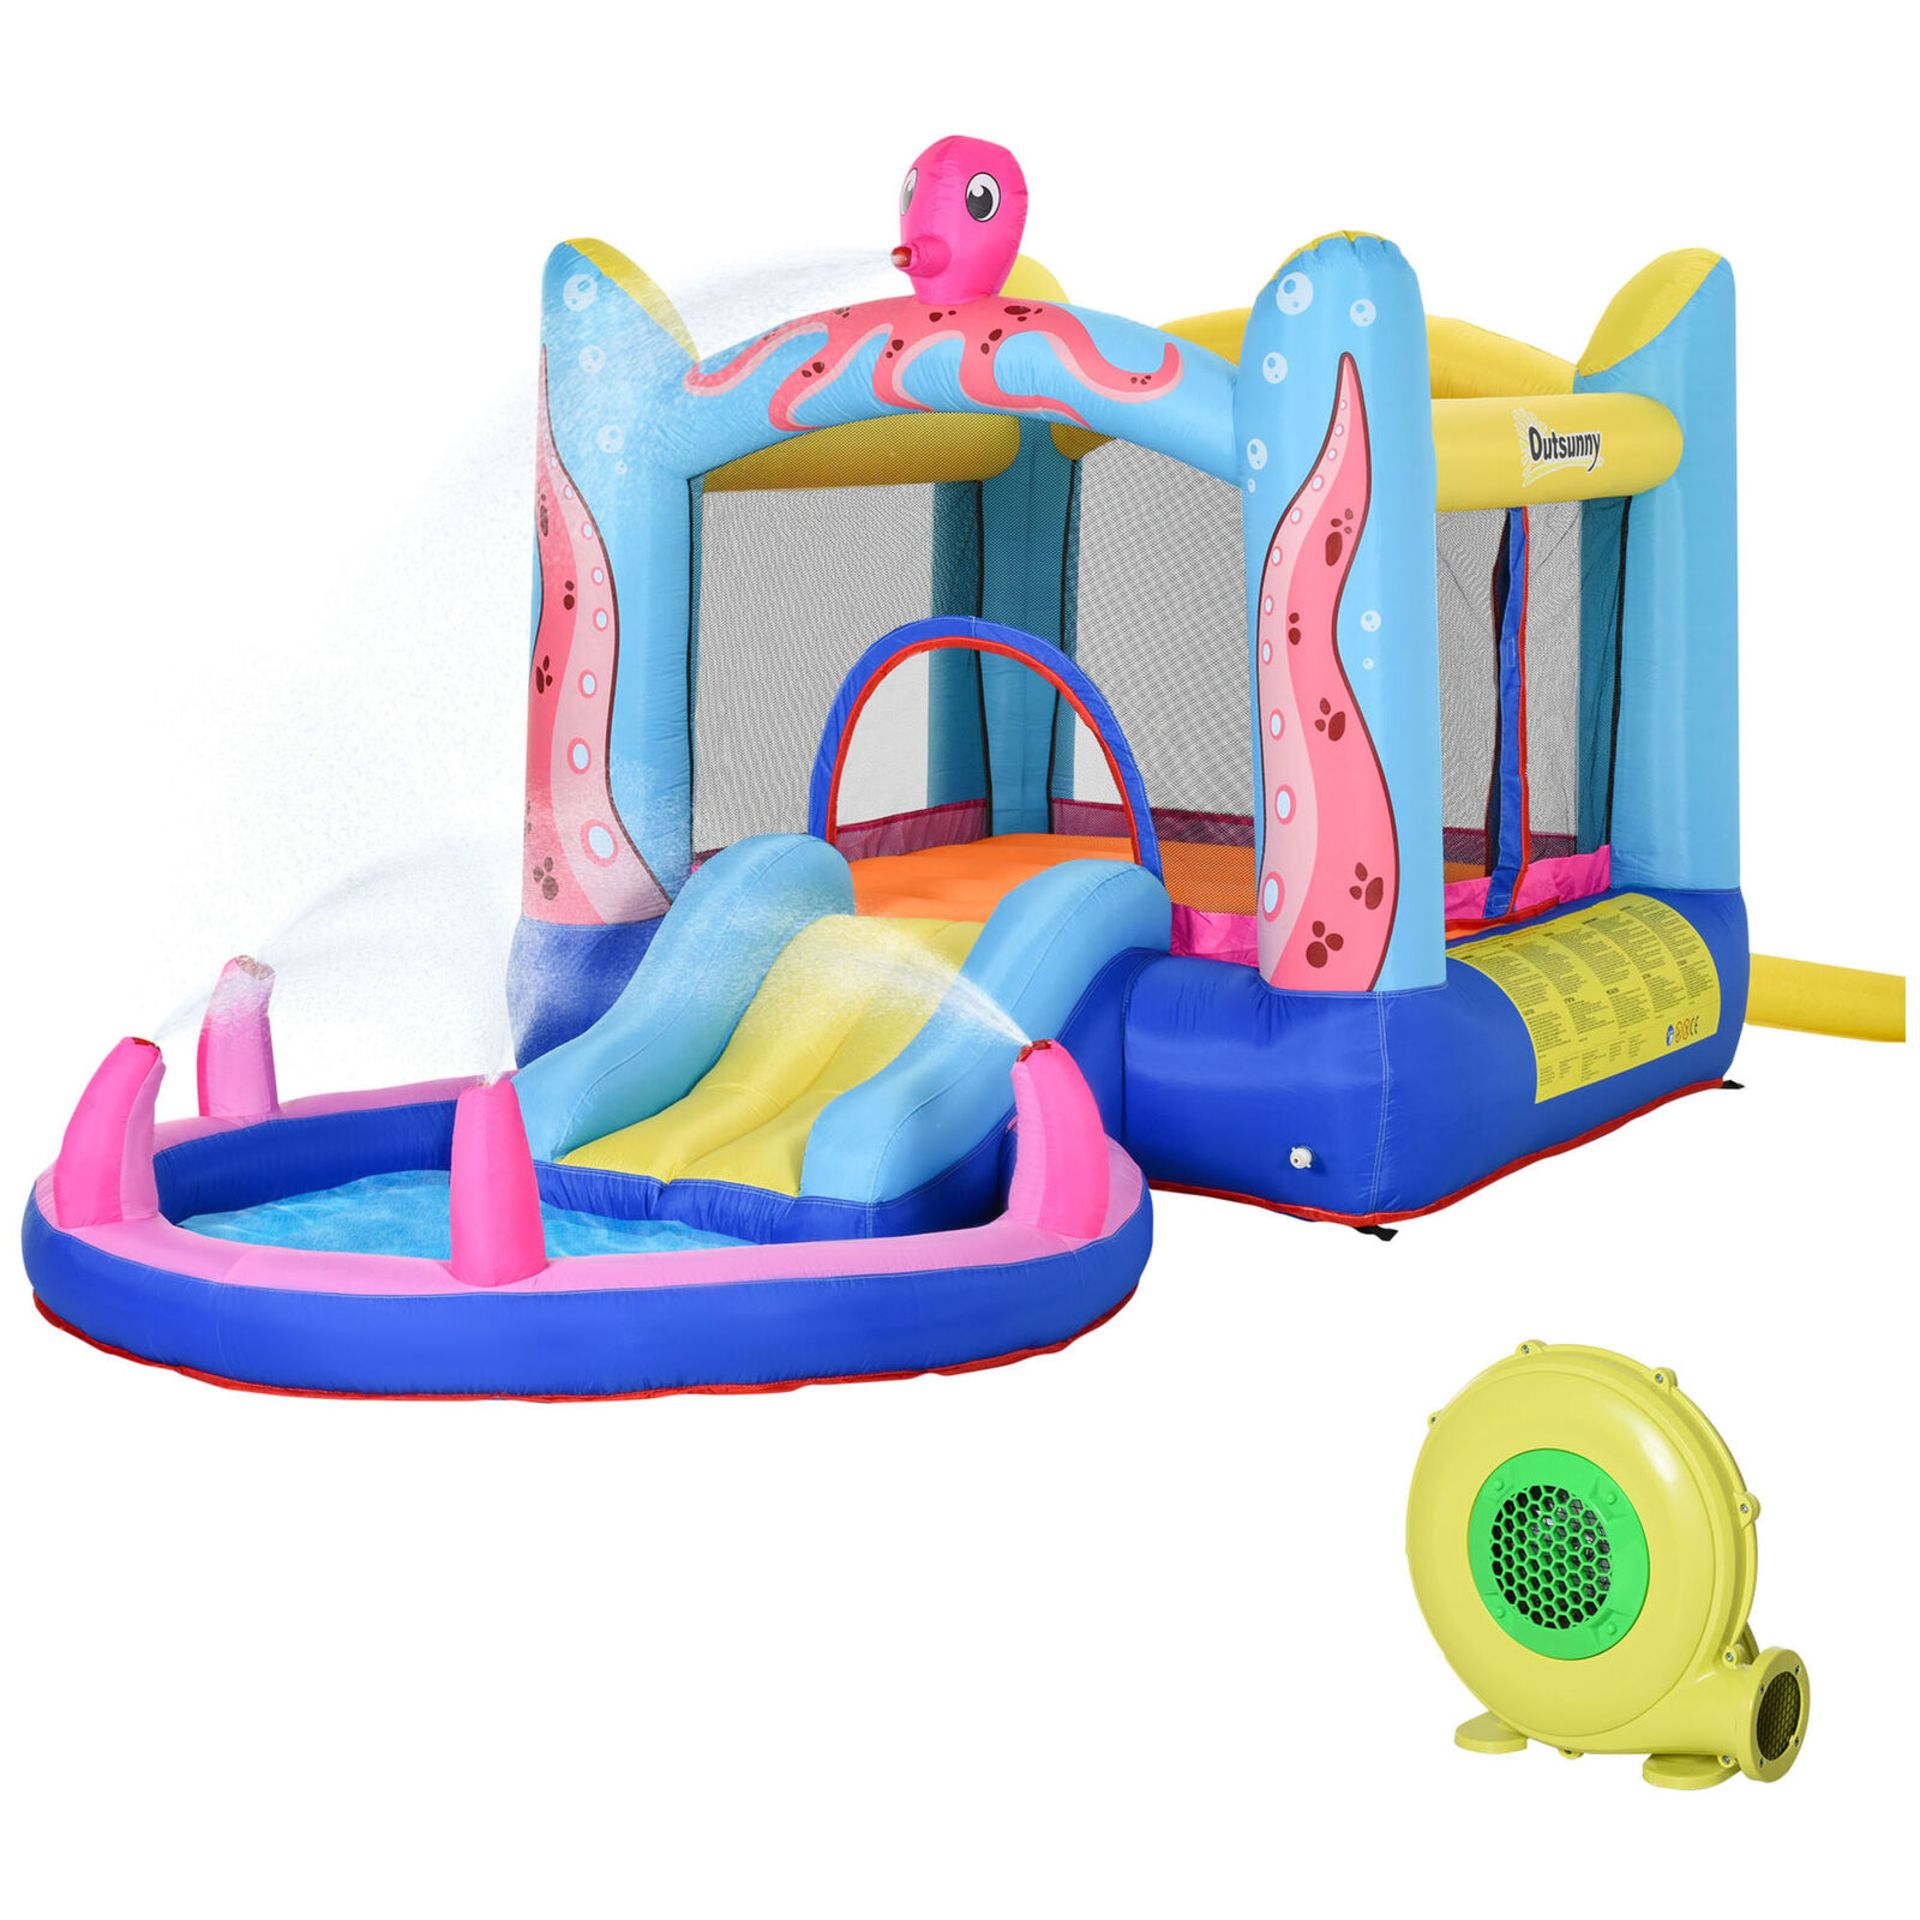 NEW WATER SLIDE BOUNCY CASTLE WITH POOL INCLUDES CARRYBAG AND BLOWER - Image 5 of 5